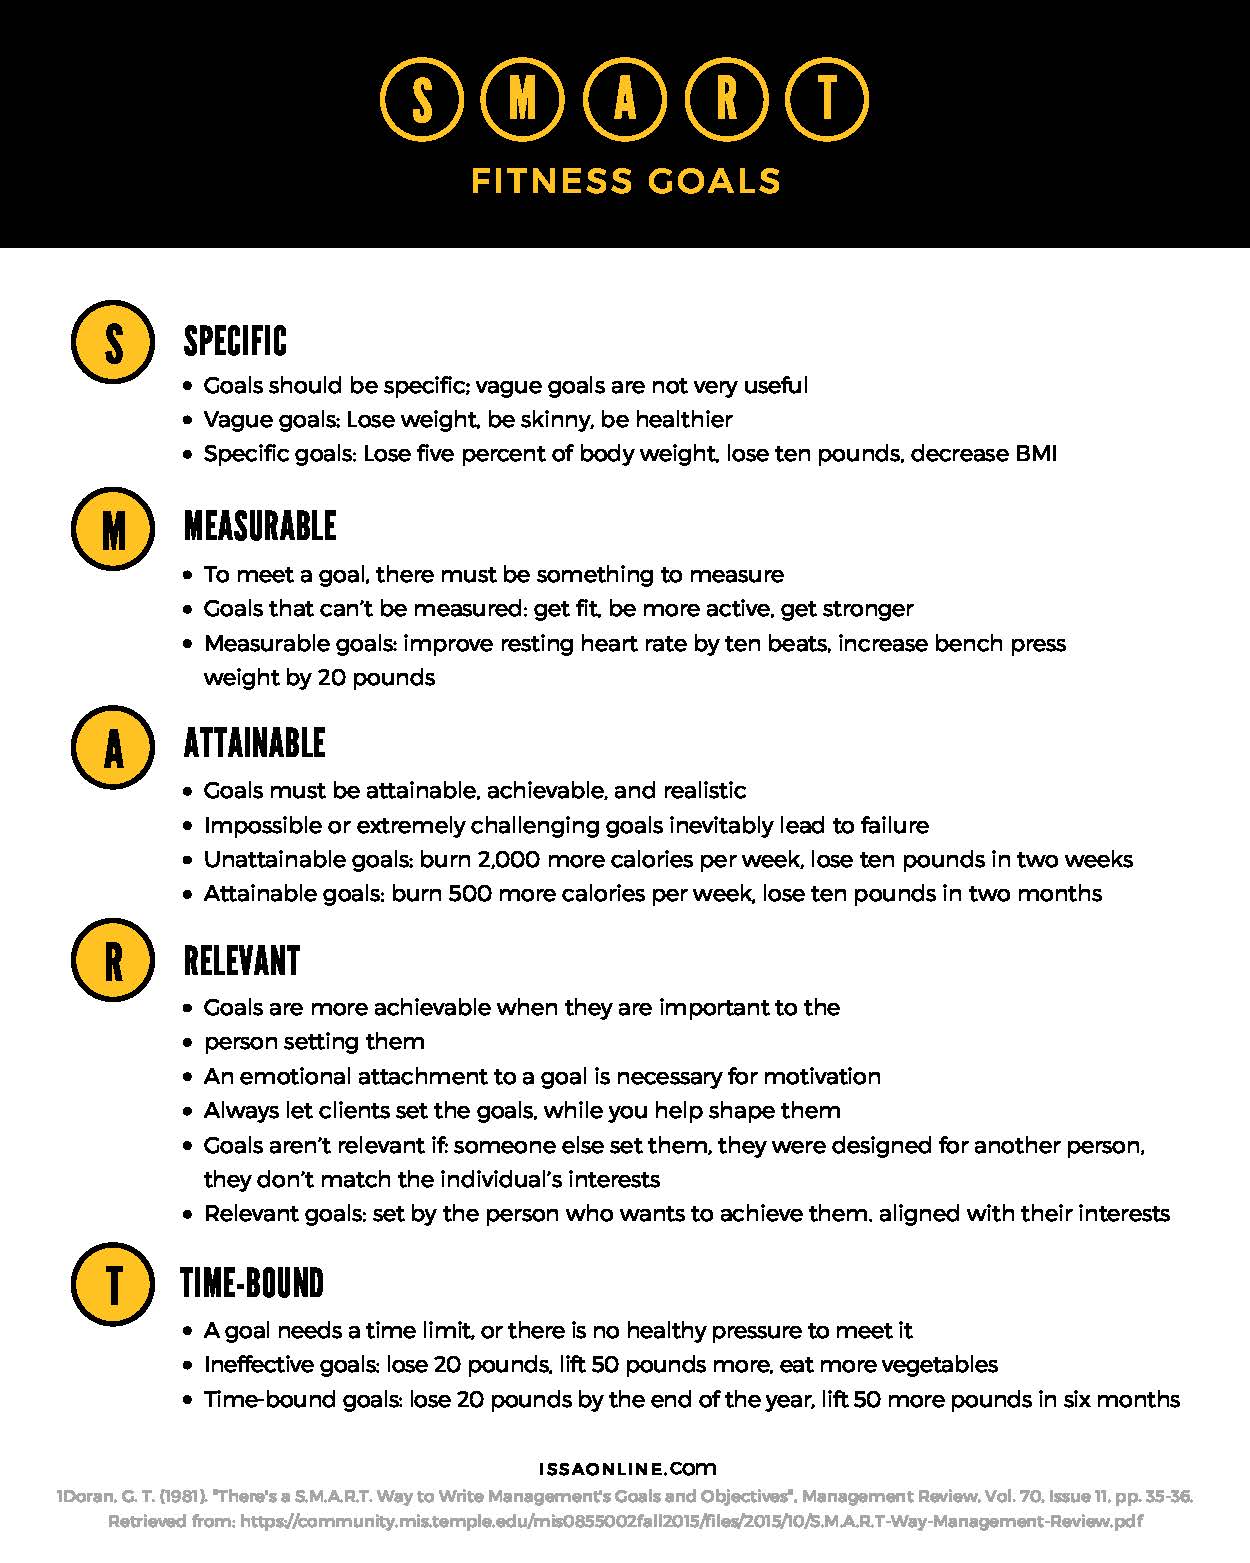 13 SMART Fitness Goals Examples That Will Motivate You